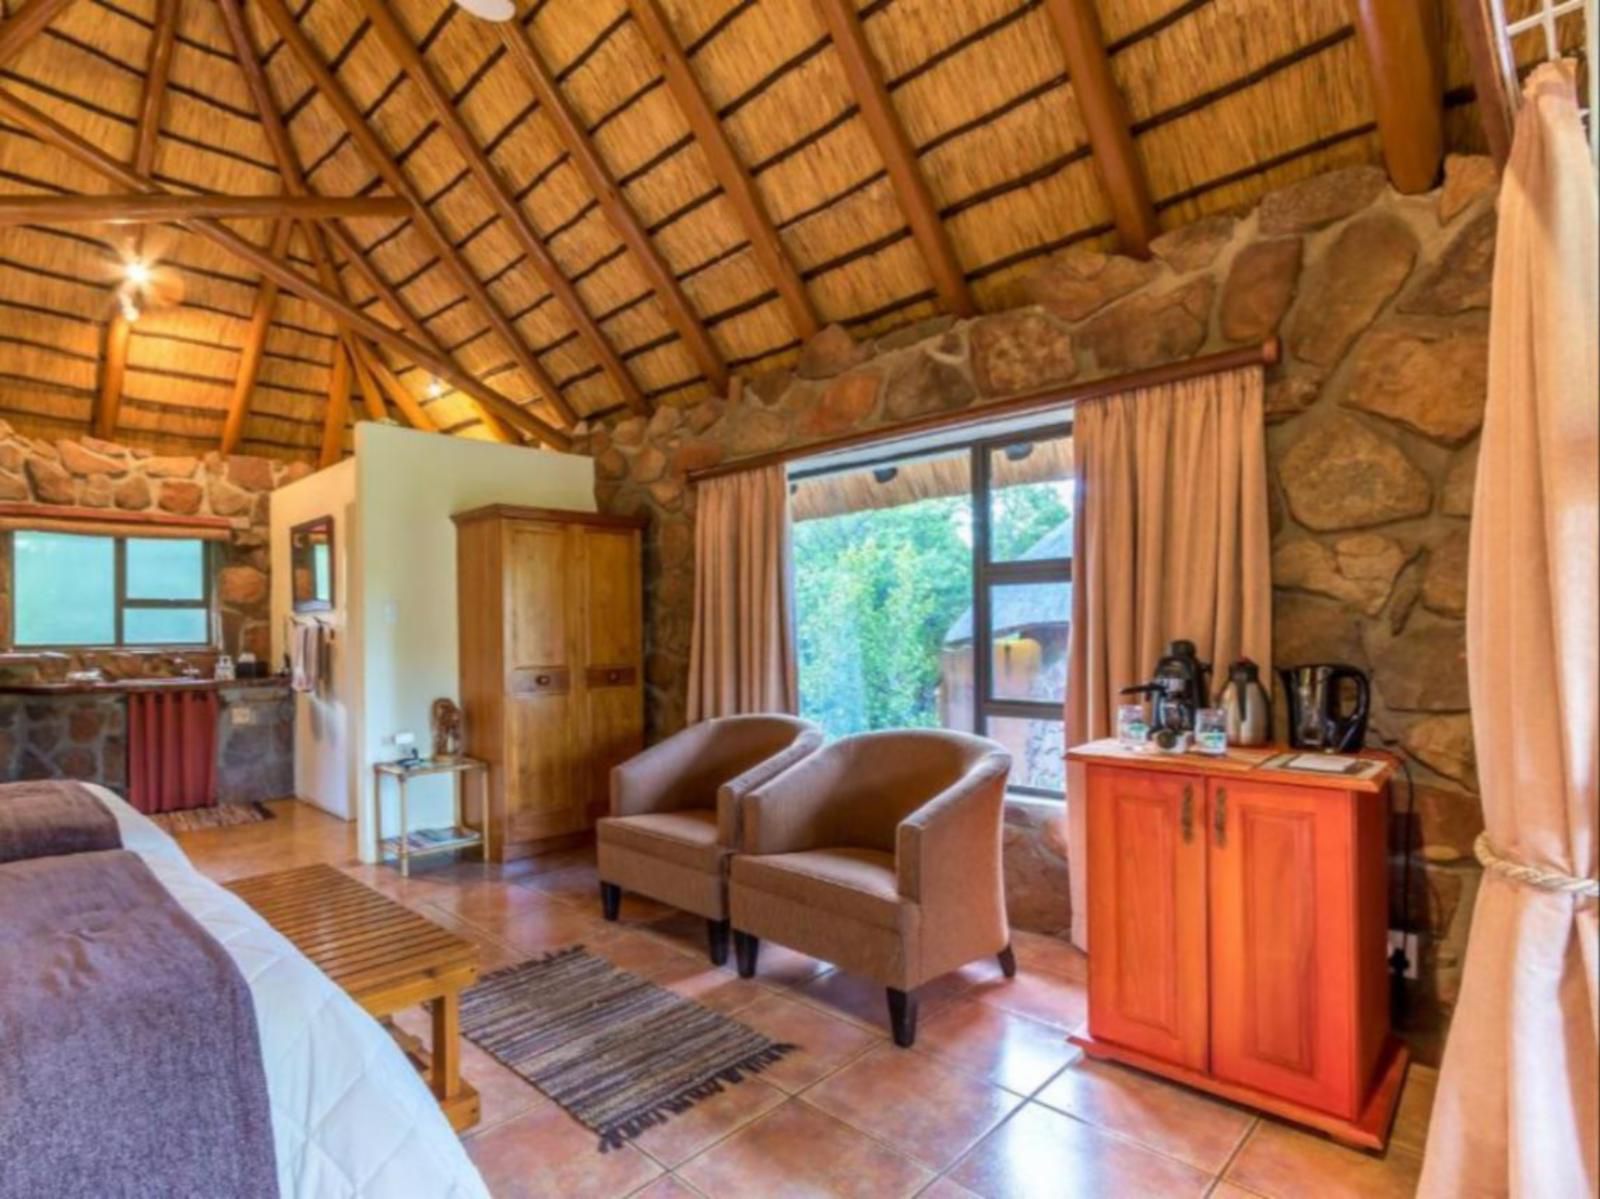 Iketla Lodge Ohrigstad Limpopo Province South Africa Cabin, Building, Architecture, Living Room